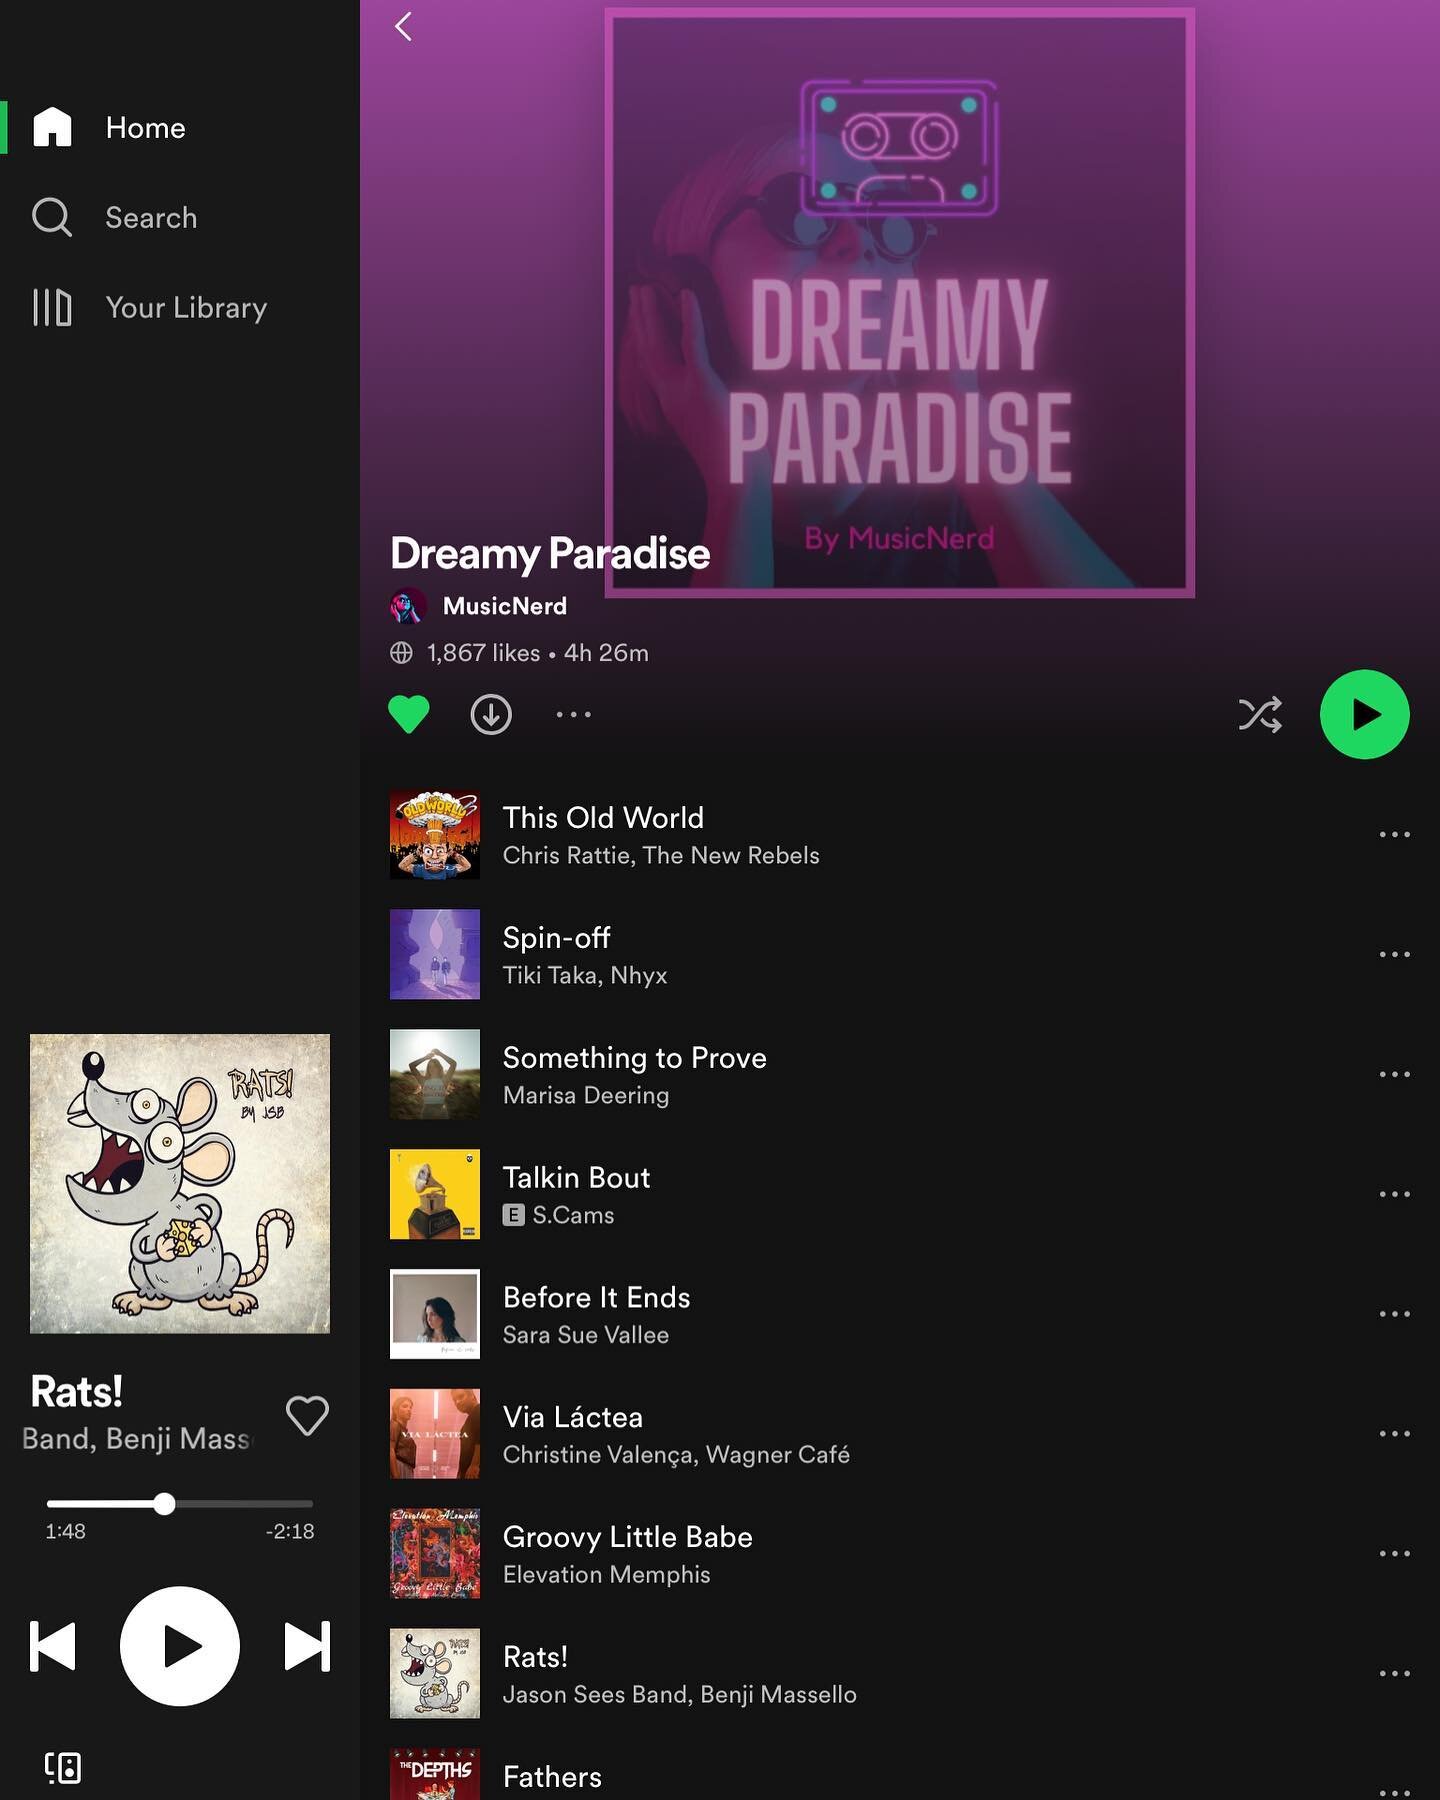 #thankyou @music_nerd_  for including our latest song Rats! In your &ldquo;Dreamy Paradise&rdquo; #spotifyplaylist 

#jasonseesband #spotify #playlists #indiemusician